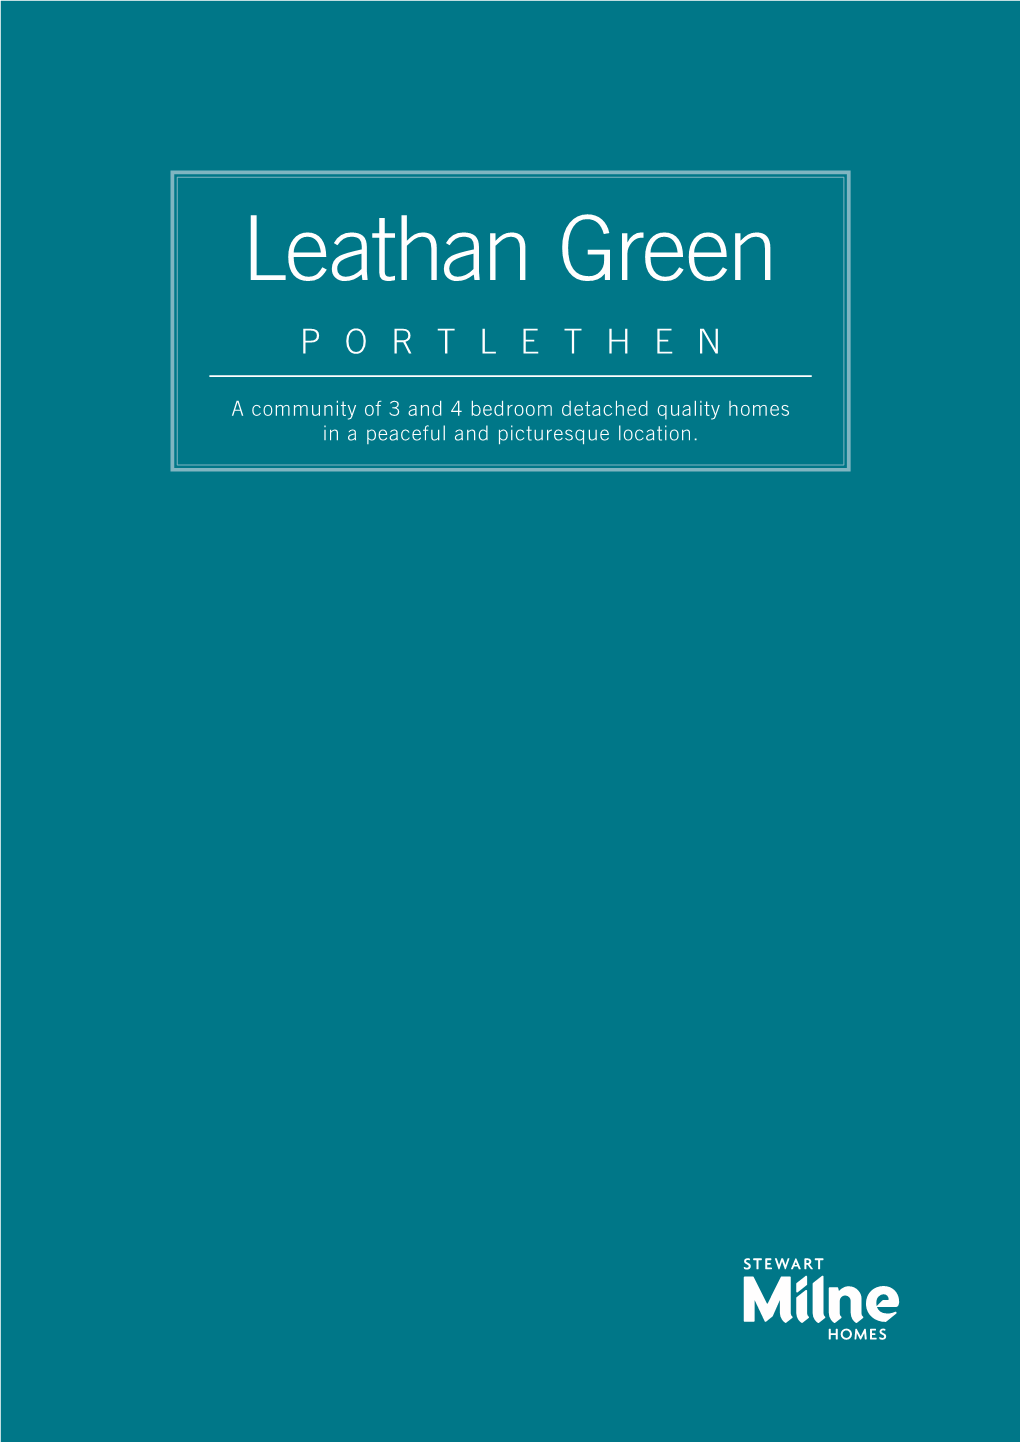 Download a Brochure Discover Leathan